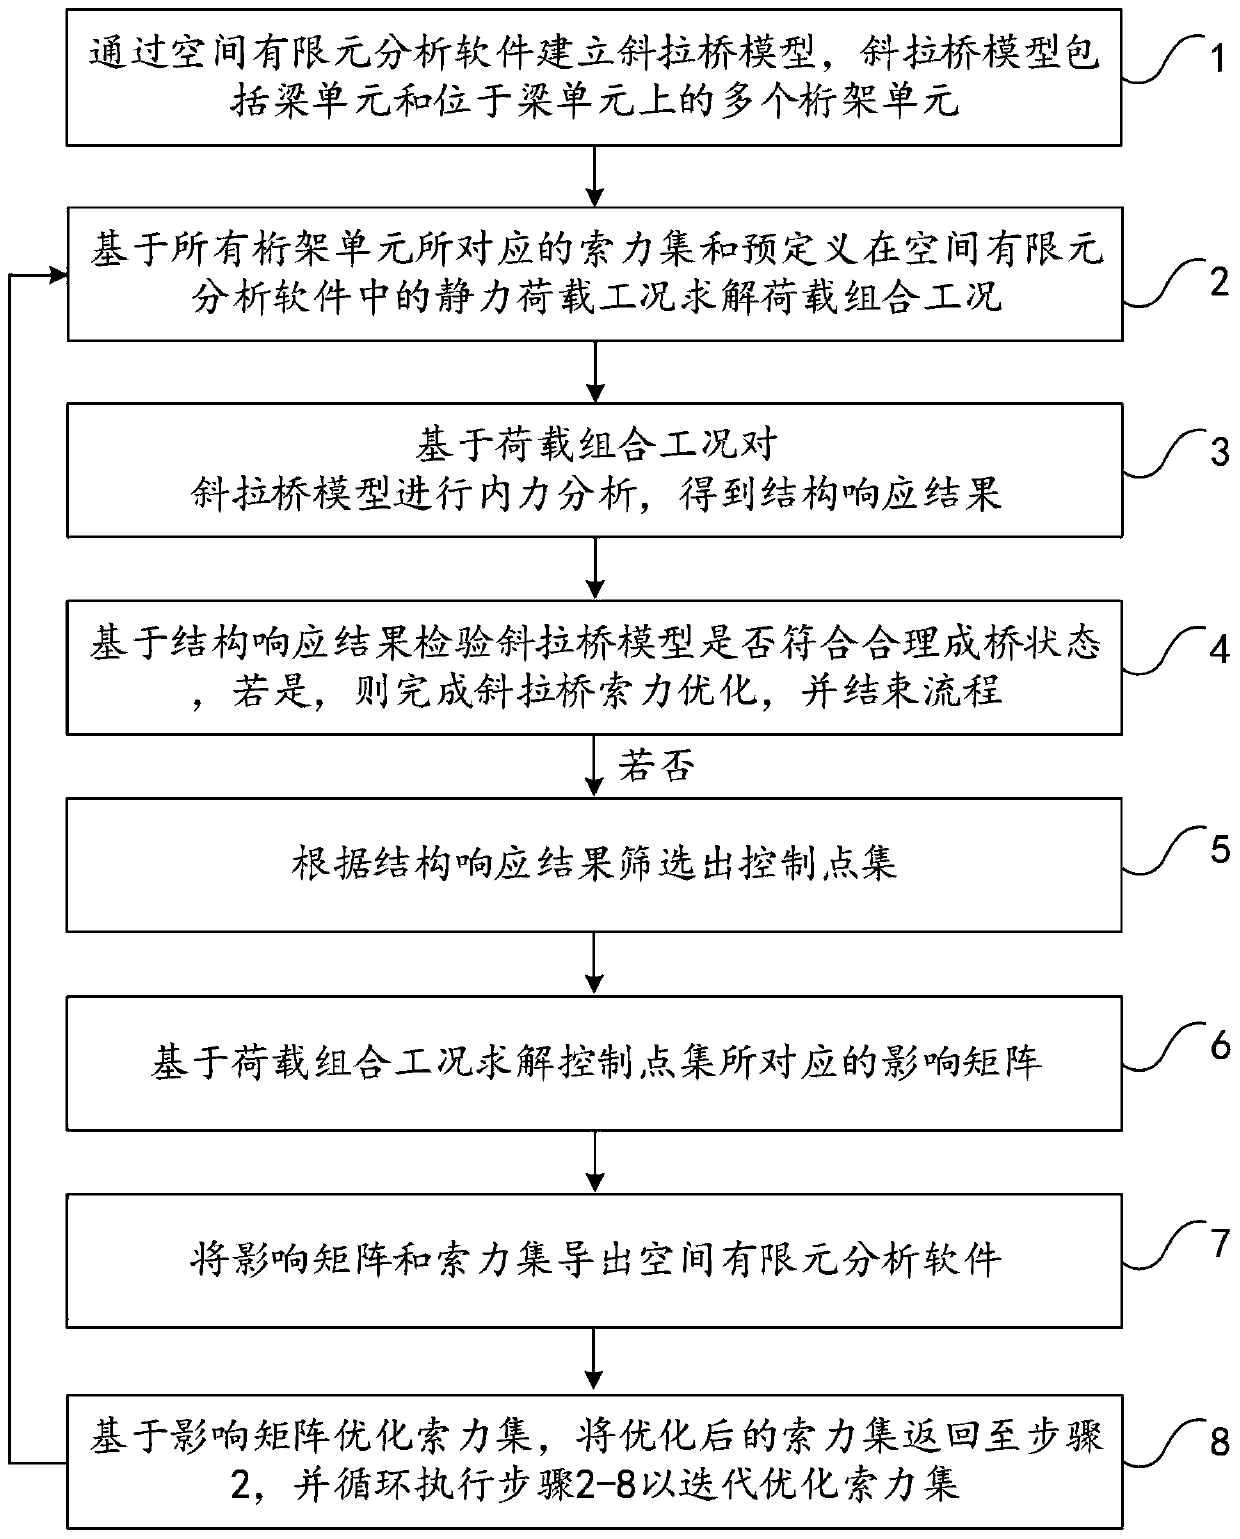 Cable-stayed bridge cable force optimization method, device, equipment and readable storage medium